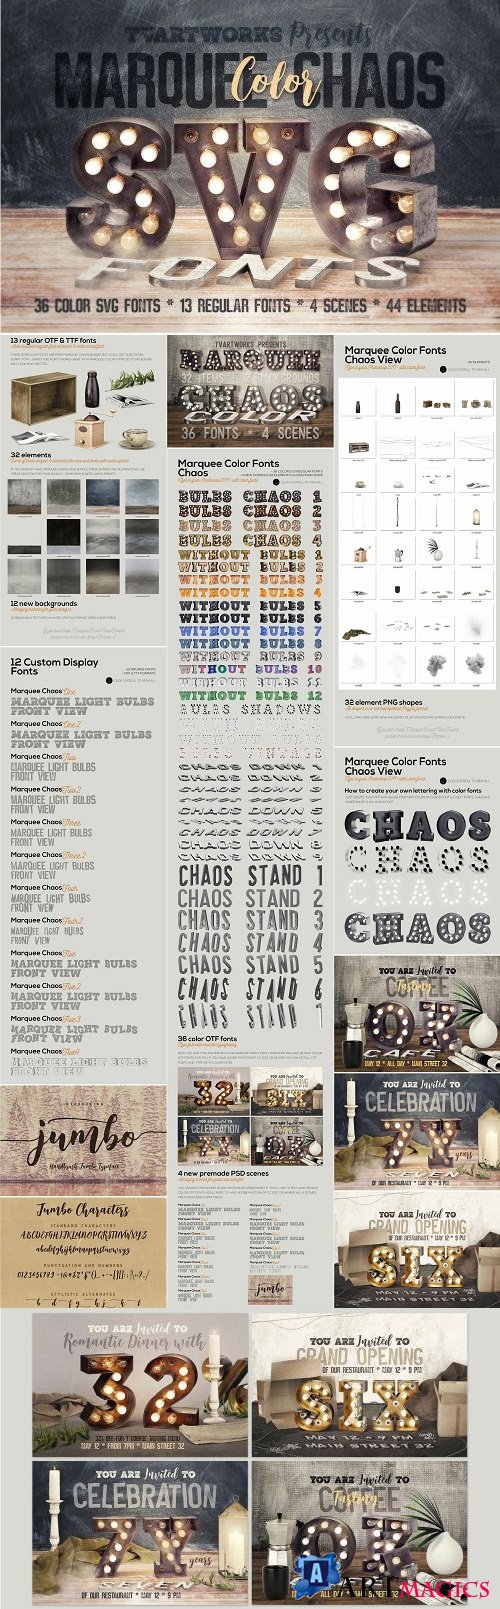 Marquee Chaos View - Color Fonts - 2491855